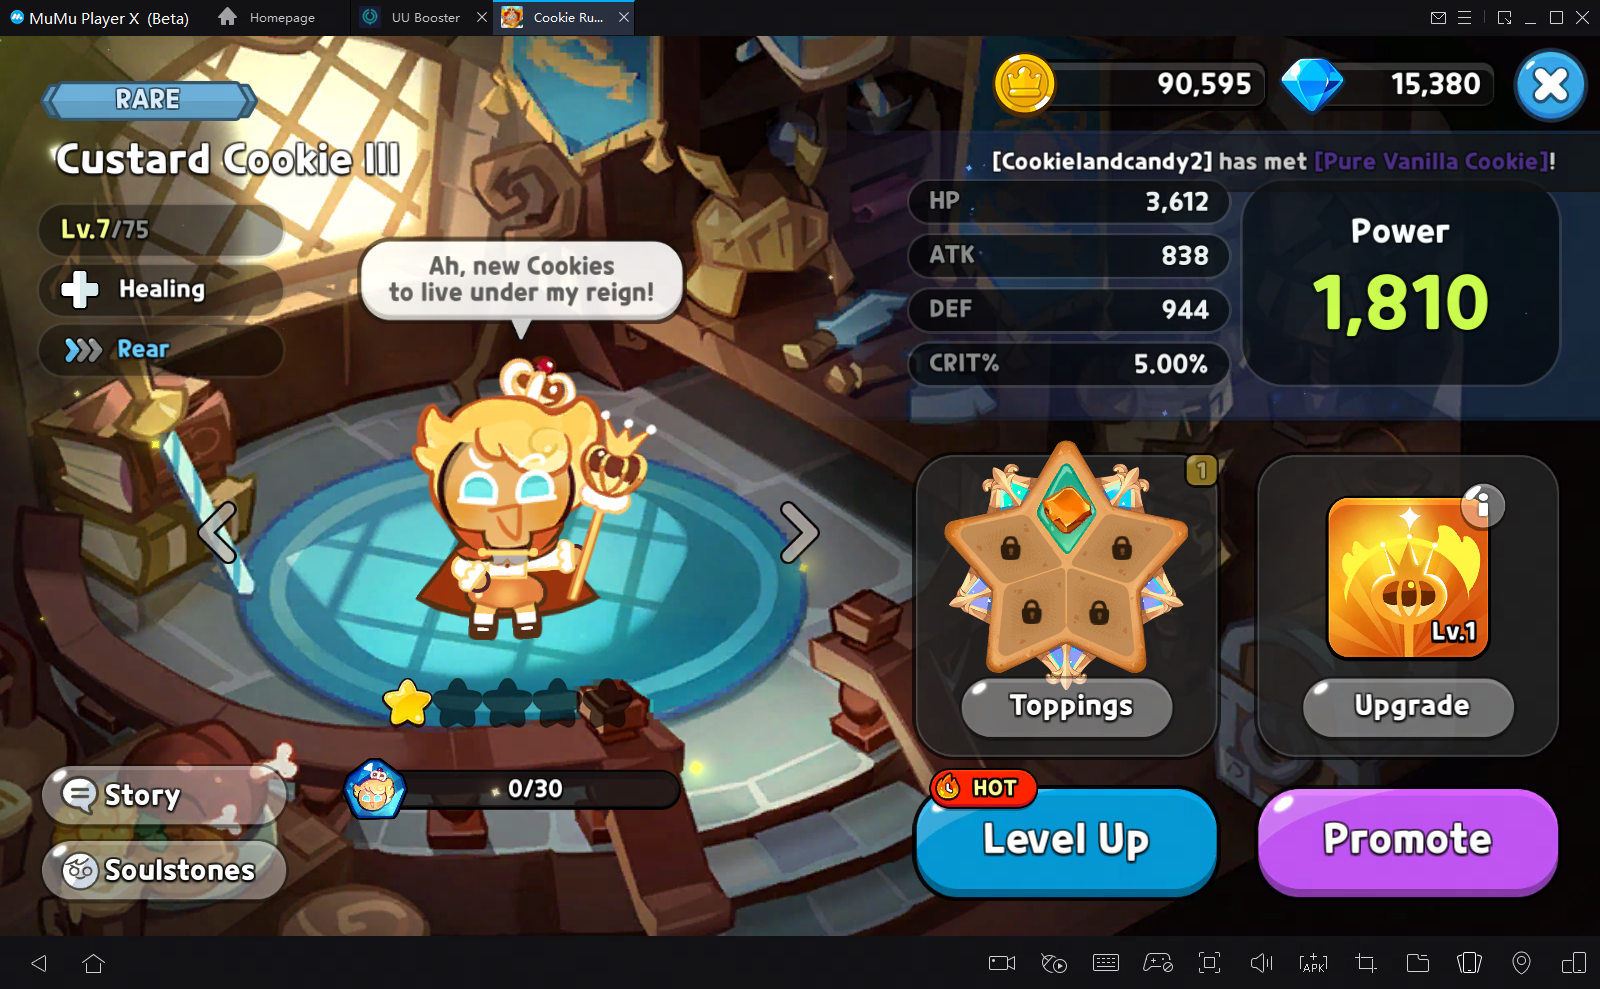 The Complete Toppings Guide For Cookie Run Kingdom